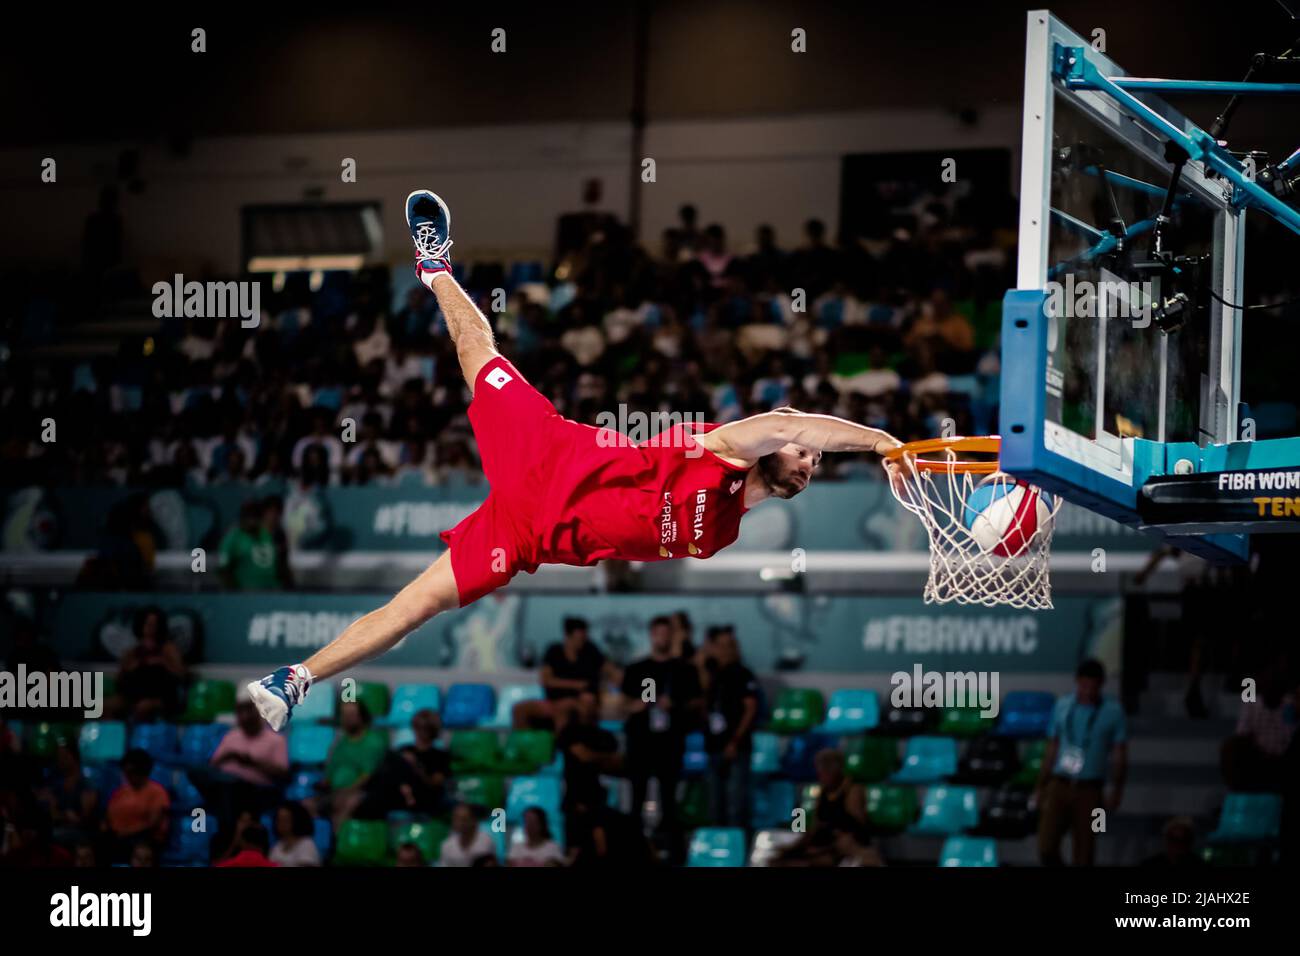 Tenerife, Spain, September 26, 2018:basketball player jumps high and shooting the ball into the basket during an acrobatic basketball show Stock Photo